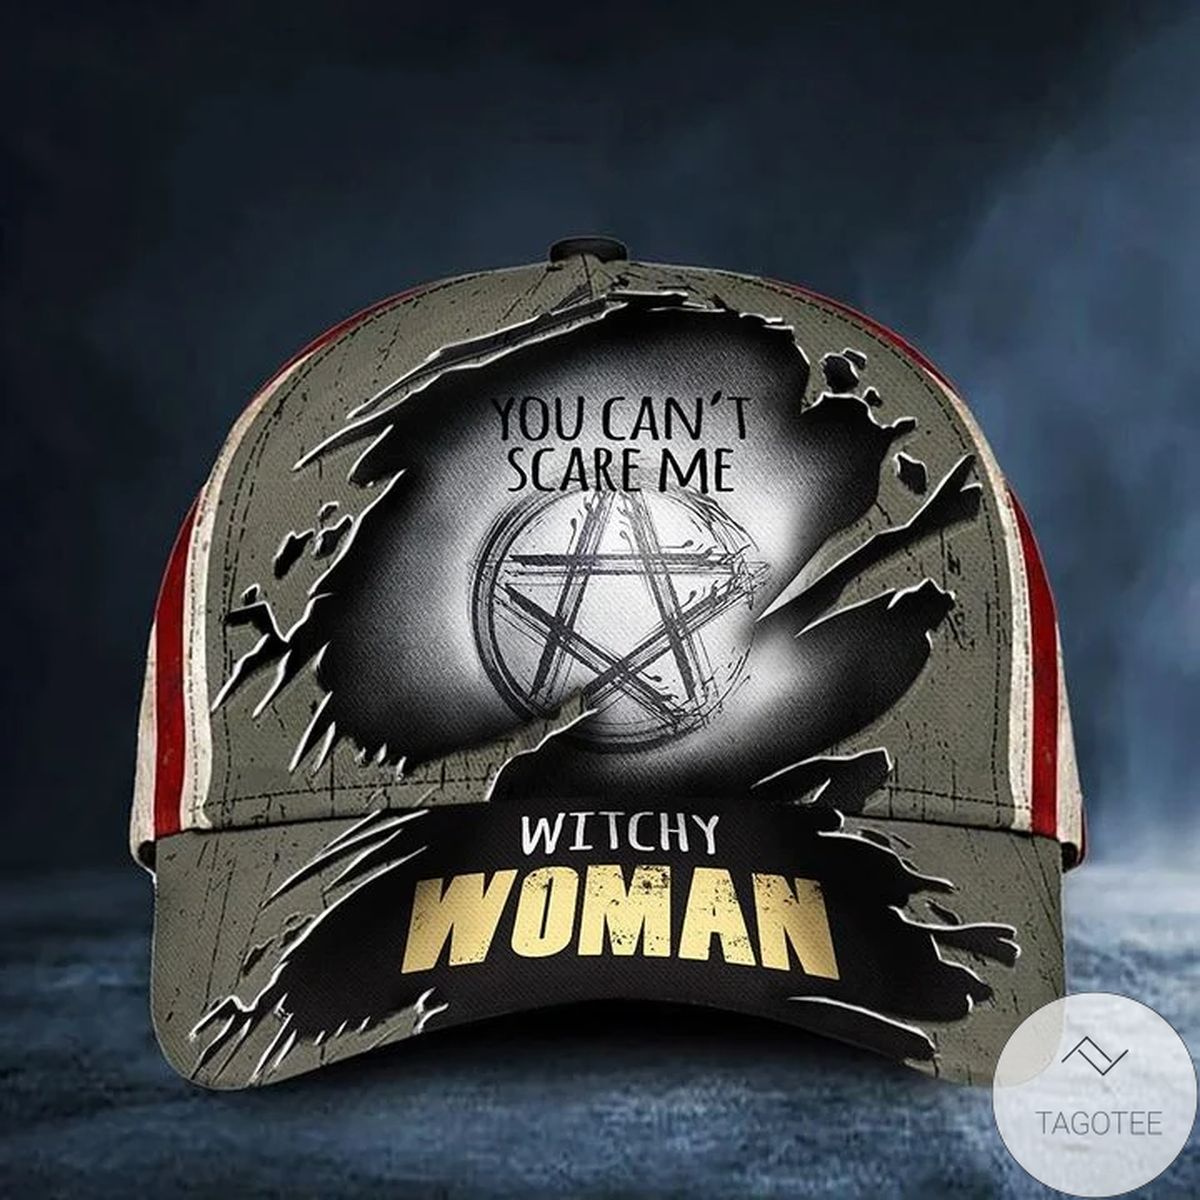 Witchcraft You Can't Scare Me Witchy Woman Hat Logo USA Flag Hat Gift Ideas For Witches